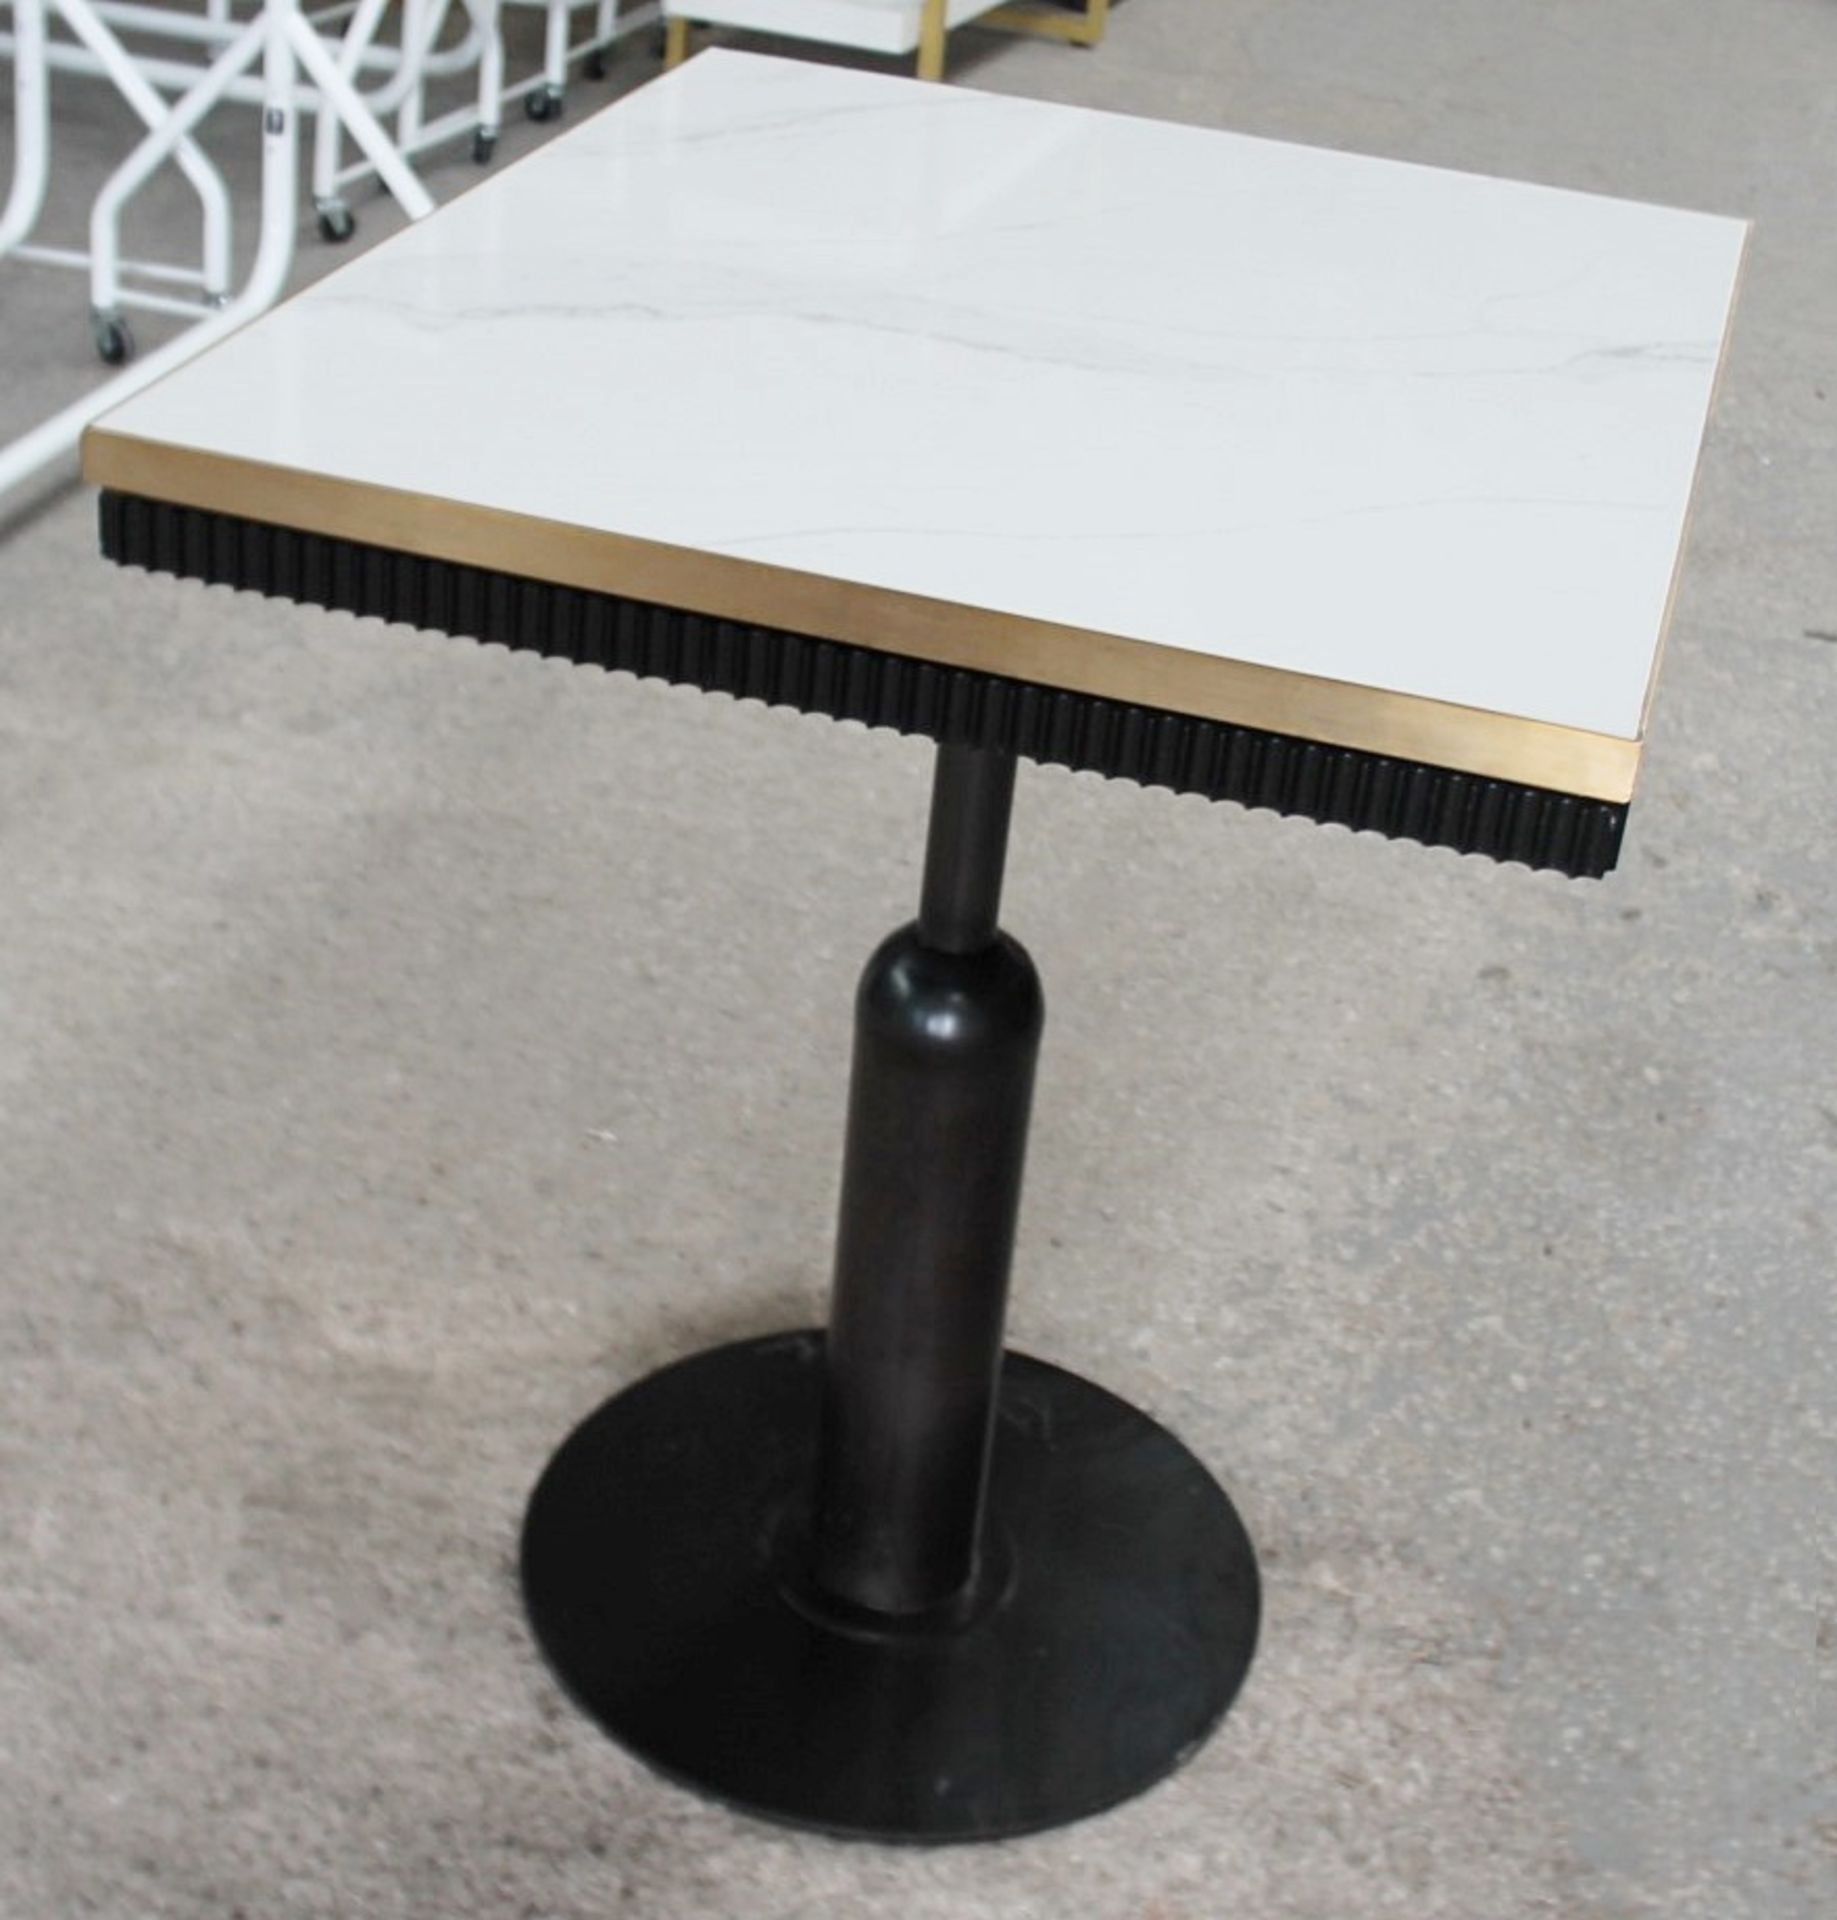 1 x Specially Commissioned Industrial-Style Marble-Topped Square Bistro Table With A Brass Trim - - Image 5 of 6